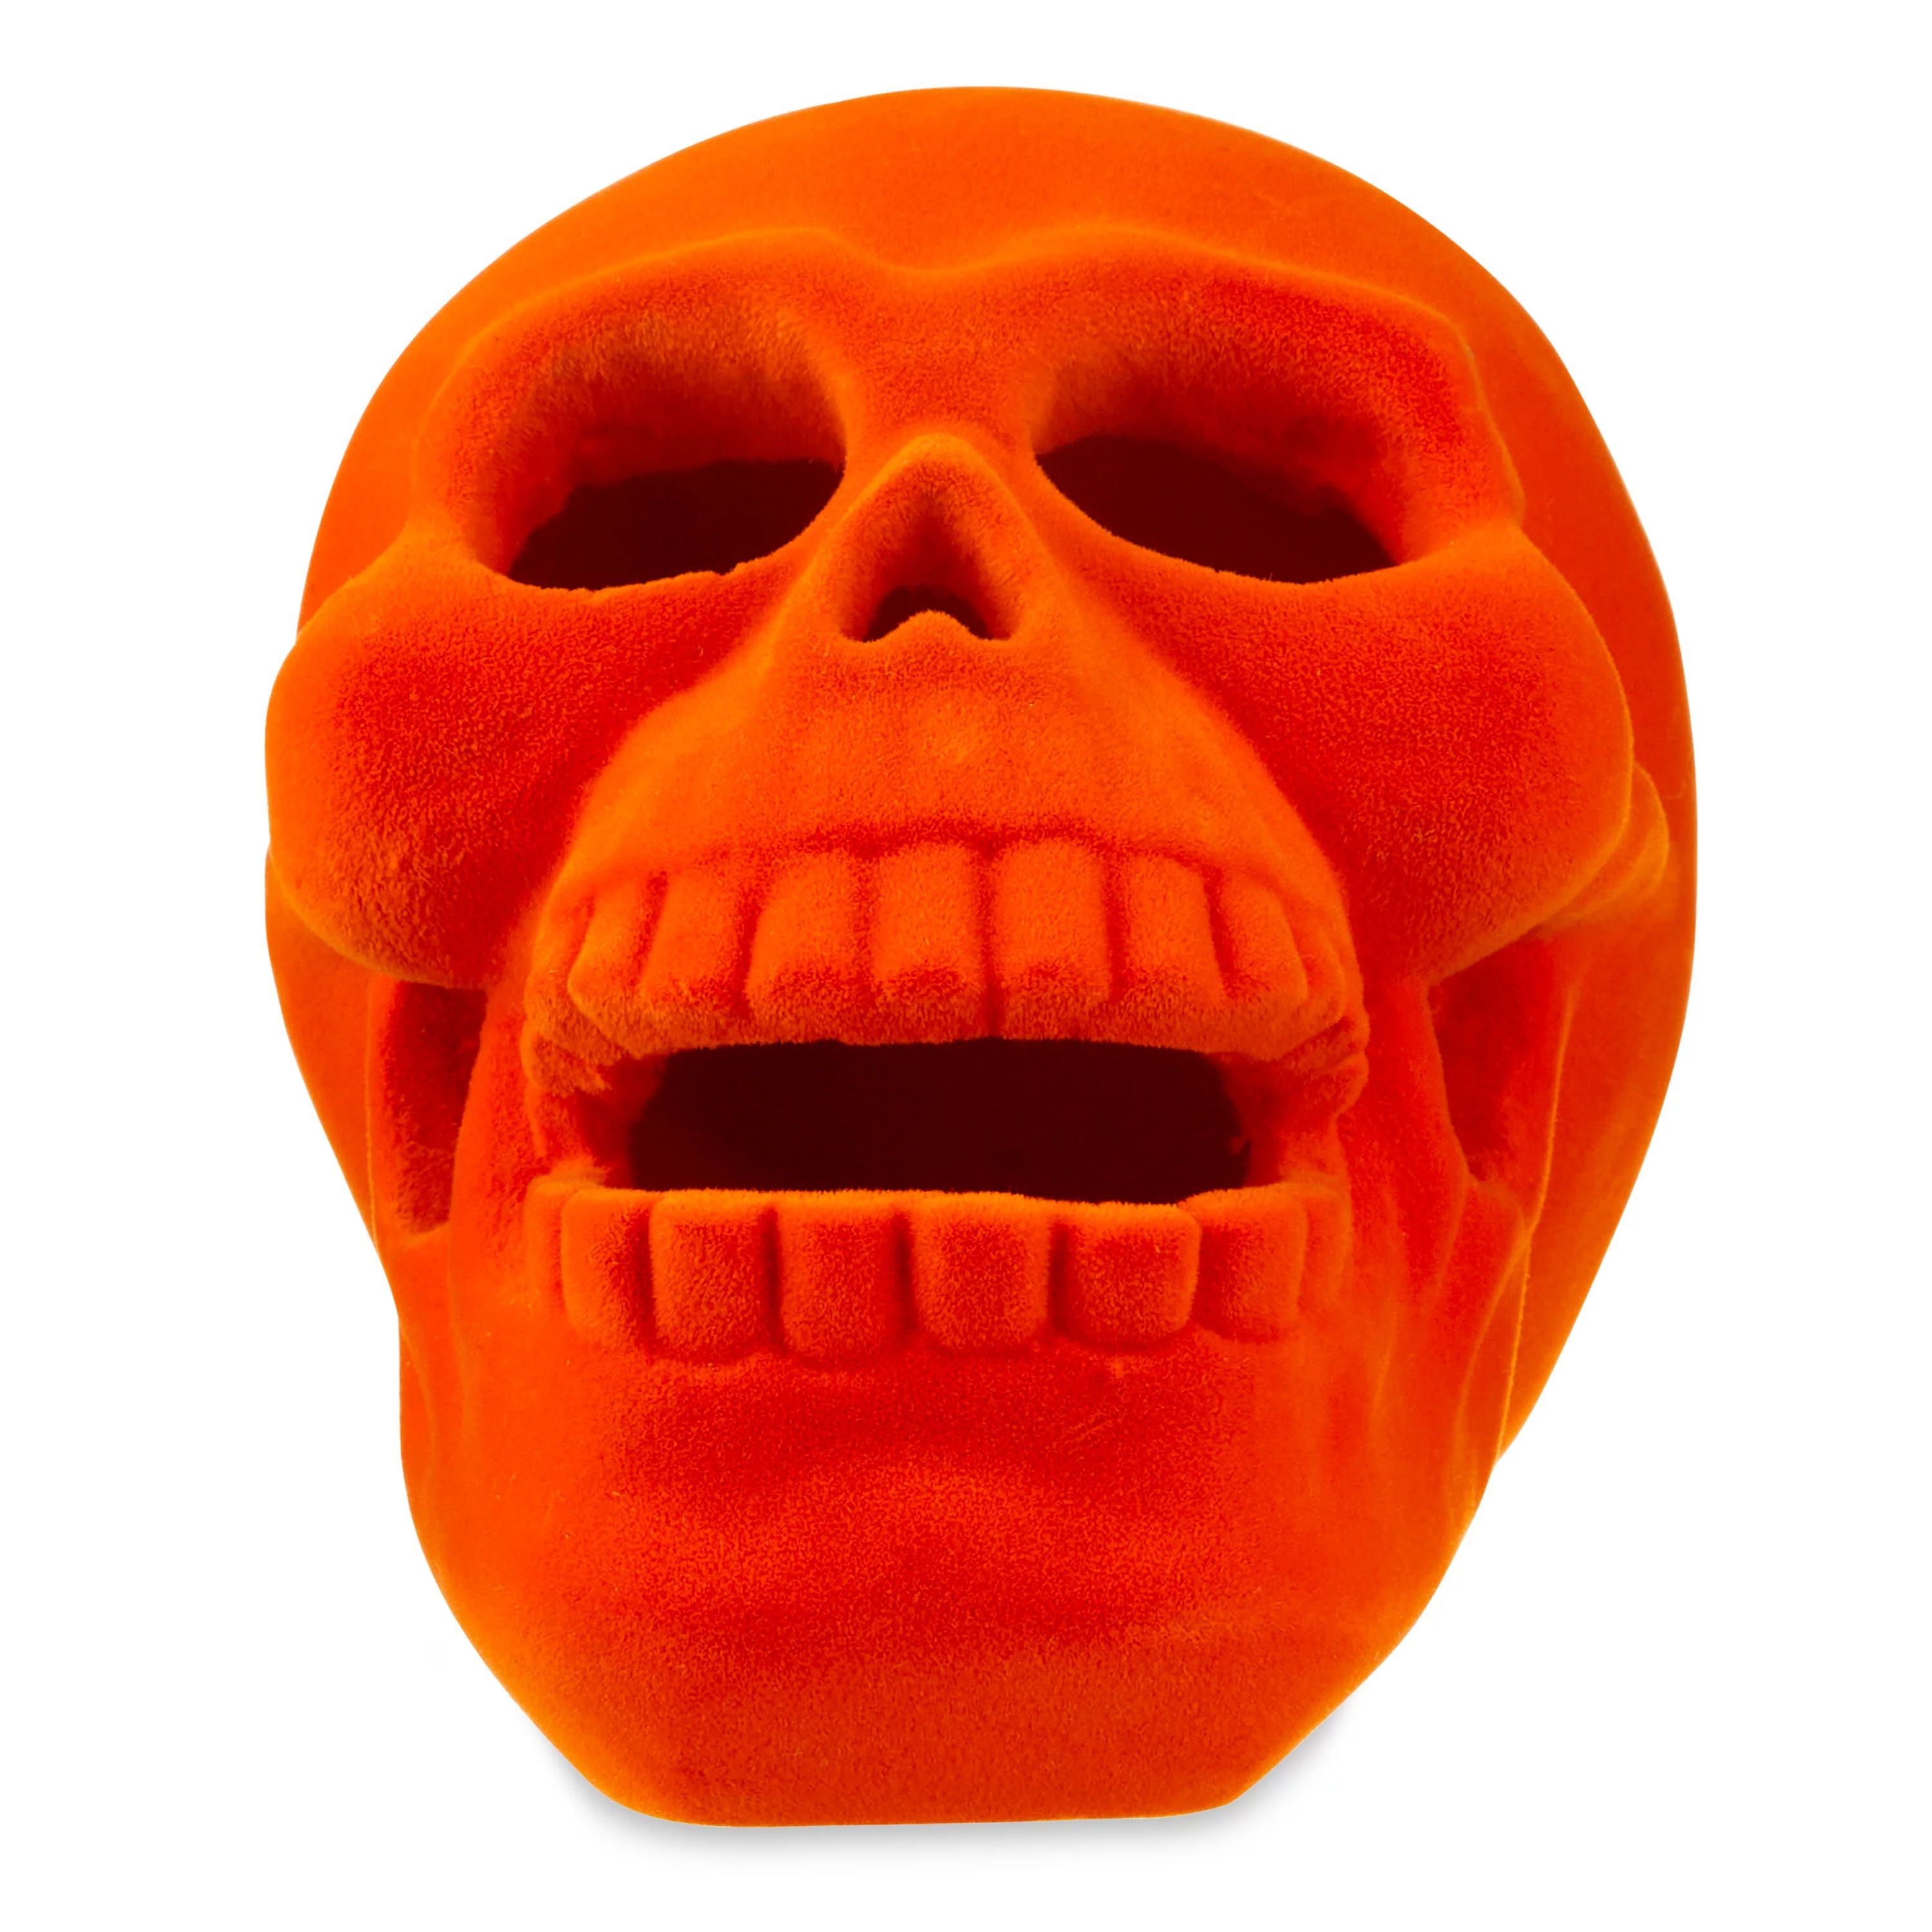 Halloween Small Orange Flocked Resin Skull Decoration, 3 in L x 4.35 in W x 3.25 in H, by Way To ... | Walmart (US)